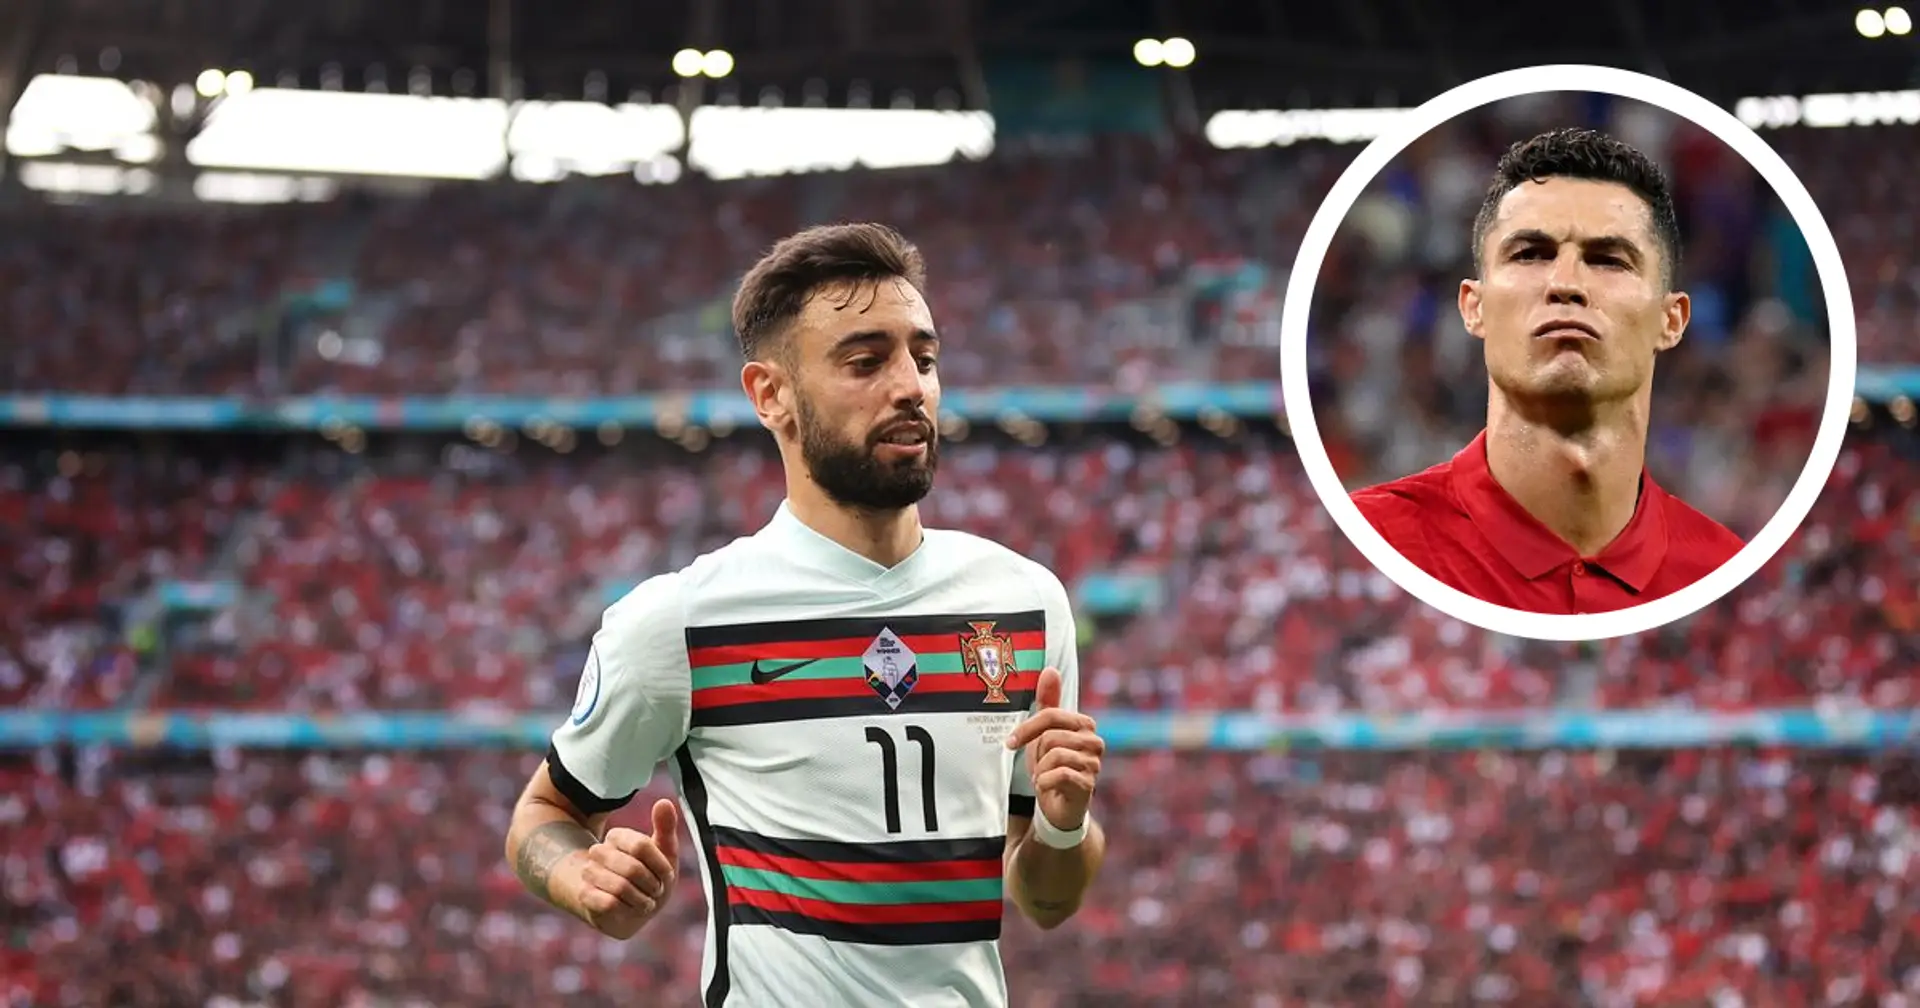 Bruno Fernandes finishes Euro 2020 as Portugal's most creative player